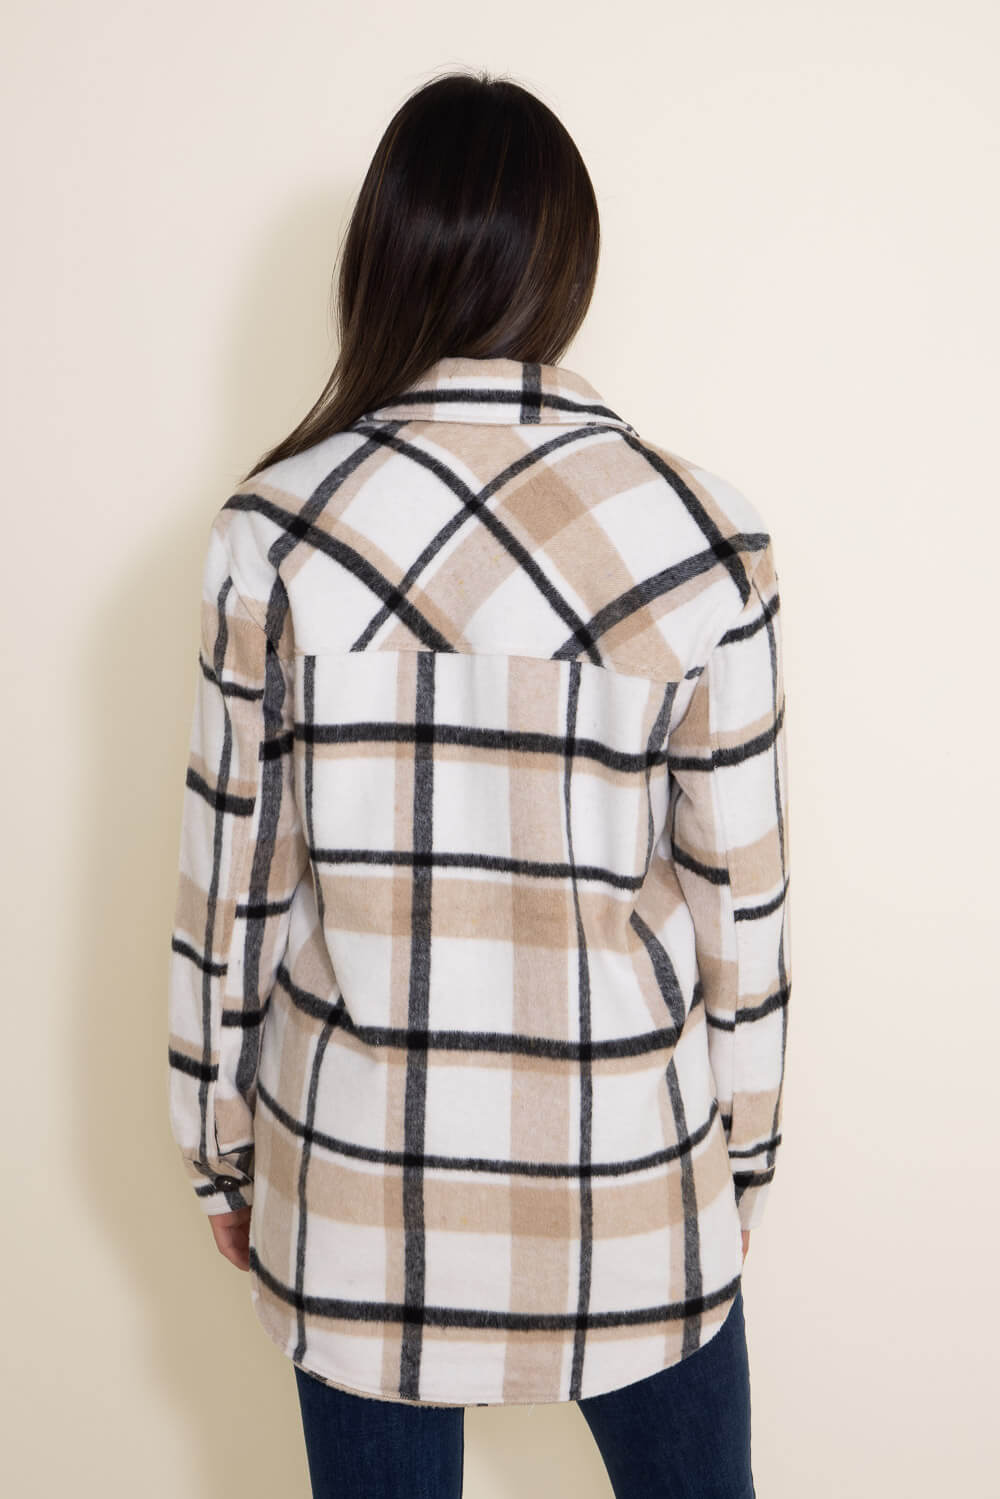 Thread & Supply Chandler Shacket for Women in Natural Plaid | J7711PND ...